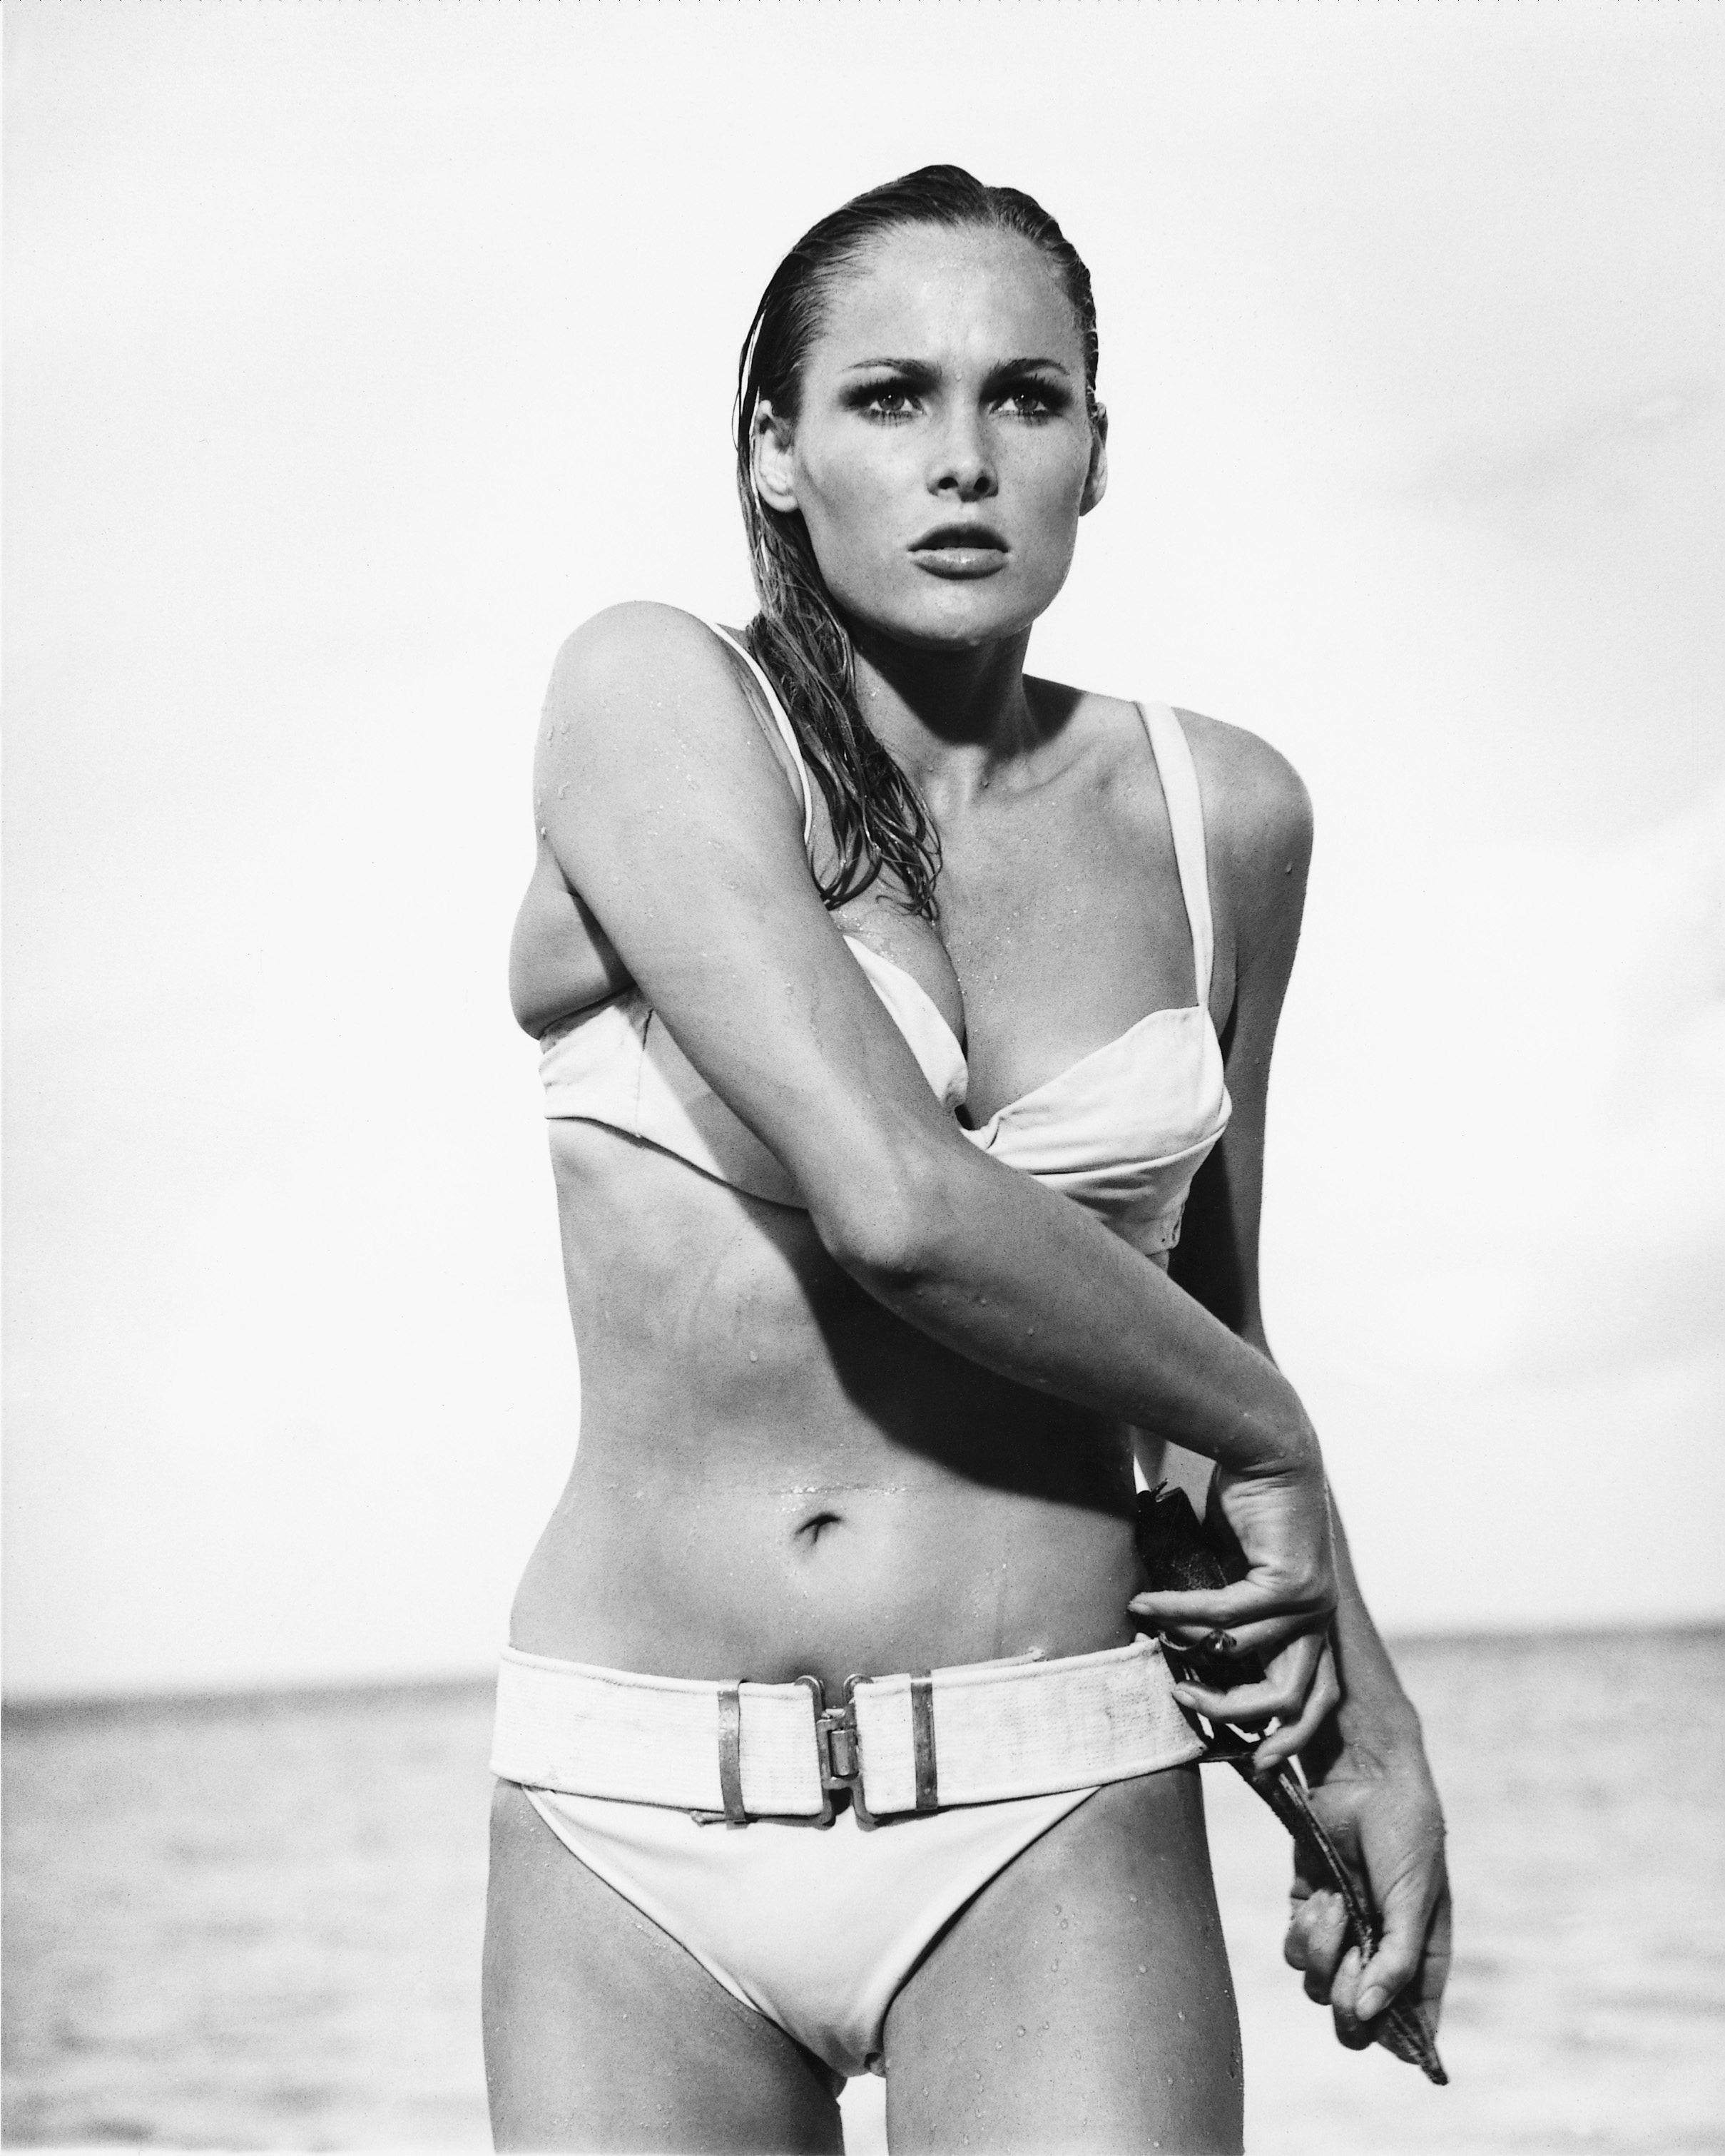 Ursula Andress as Honey Ryder in the James Bond film 'Dr. No,' in 1962. | Source: Getty Images